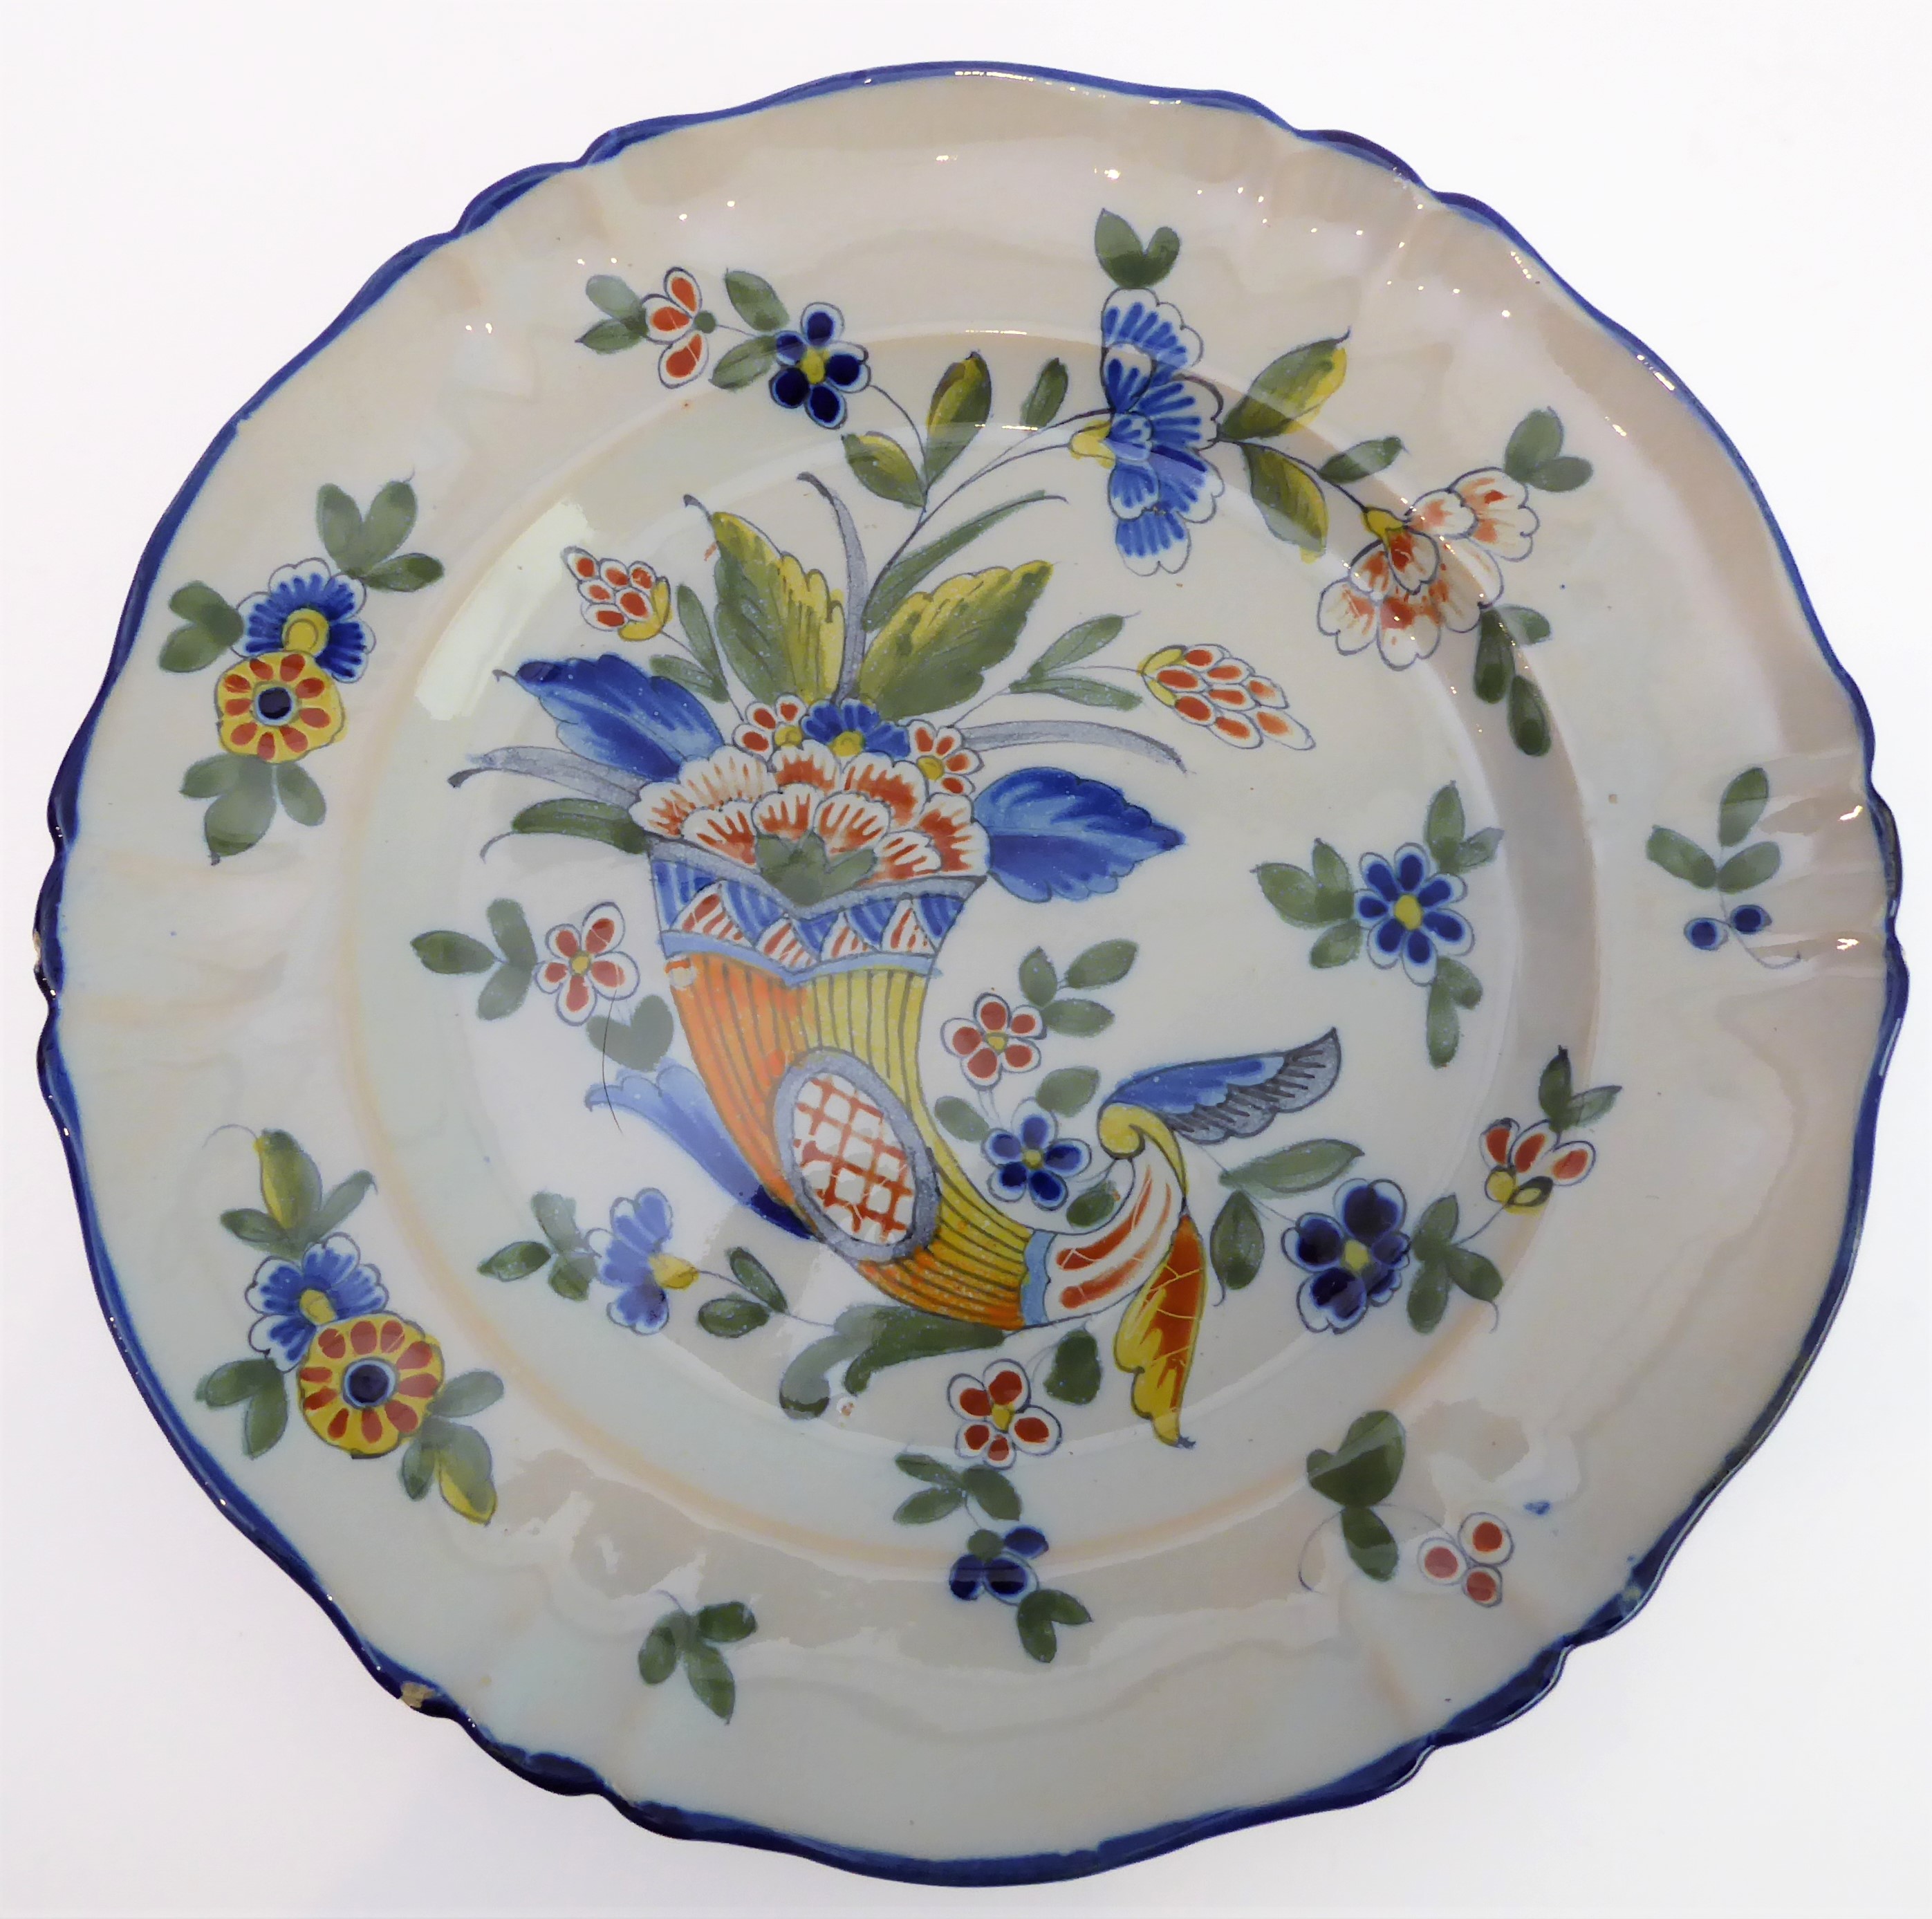 A set of eleven 19th century faience plates by Keller & Guerin at Luneville (early marks). (The - Image 16 of 17